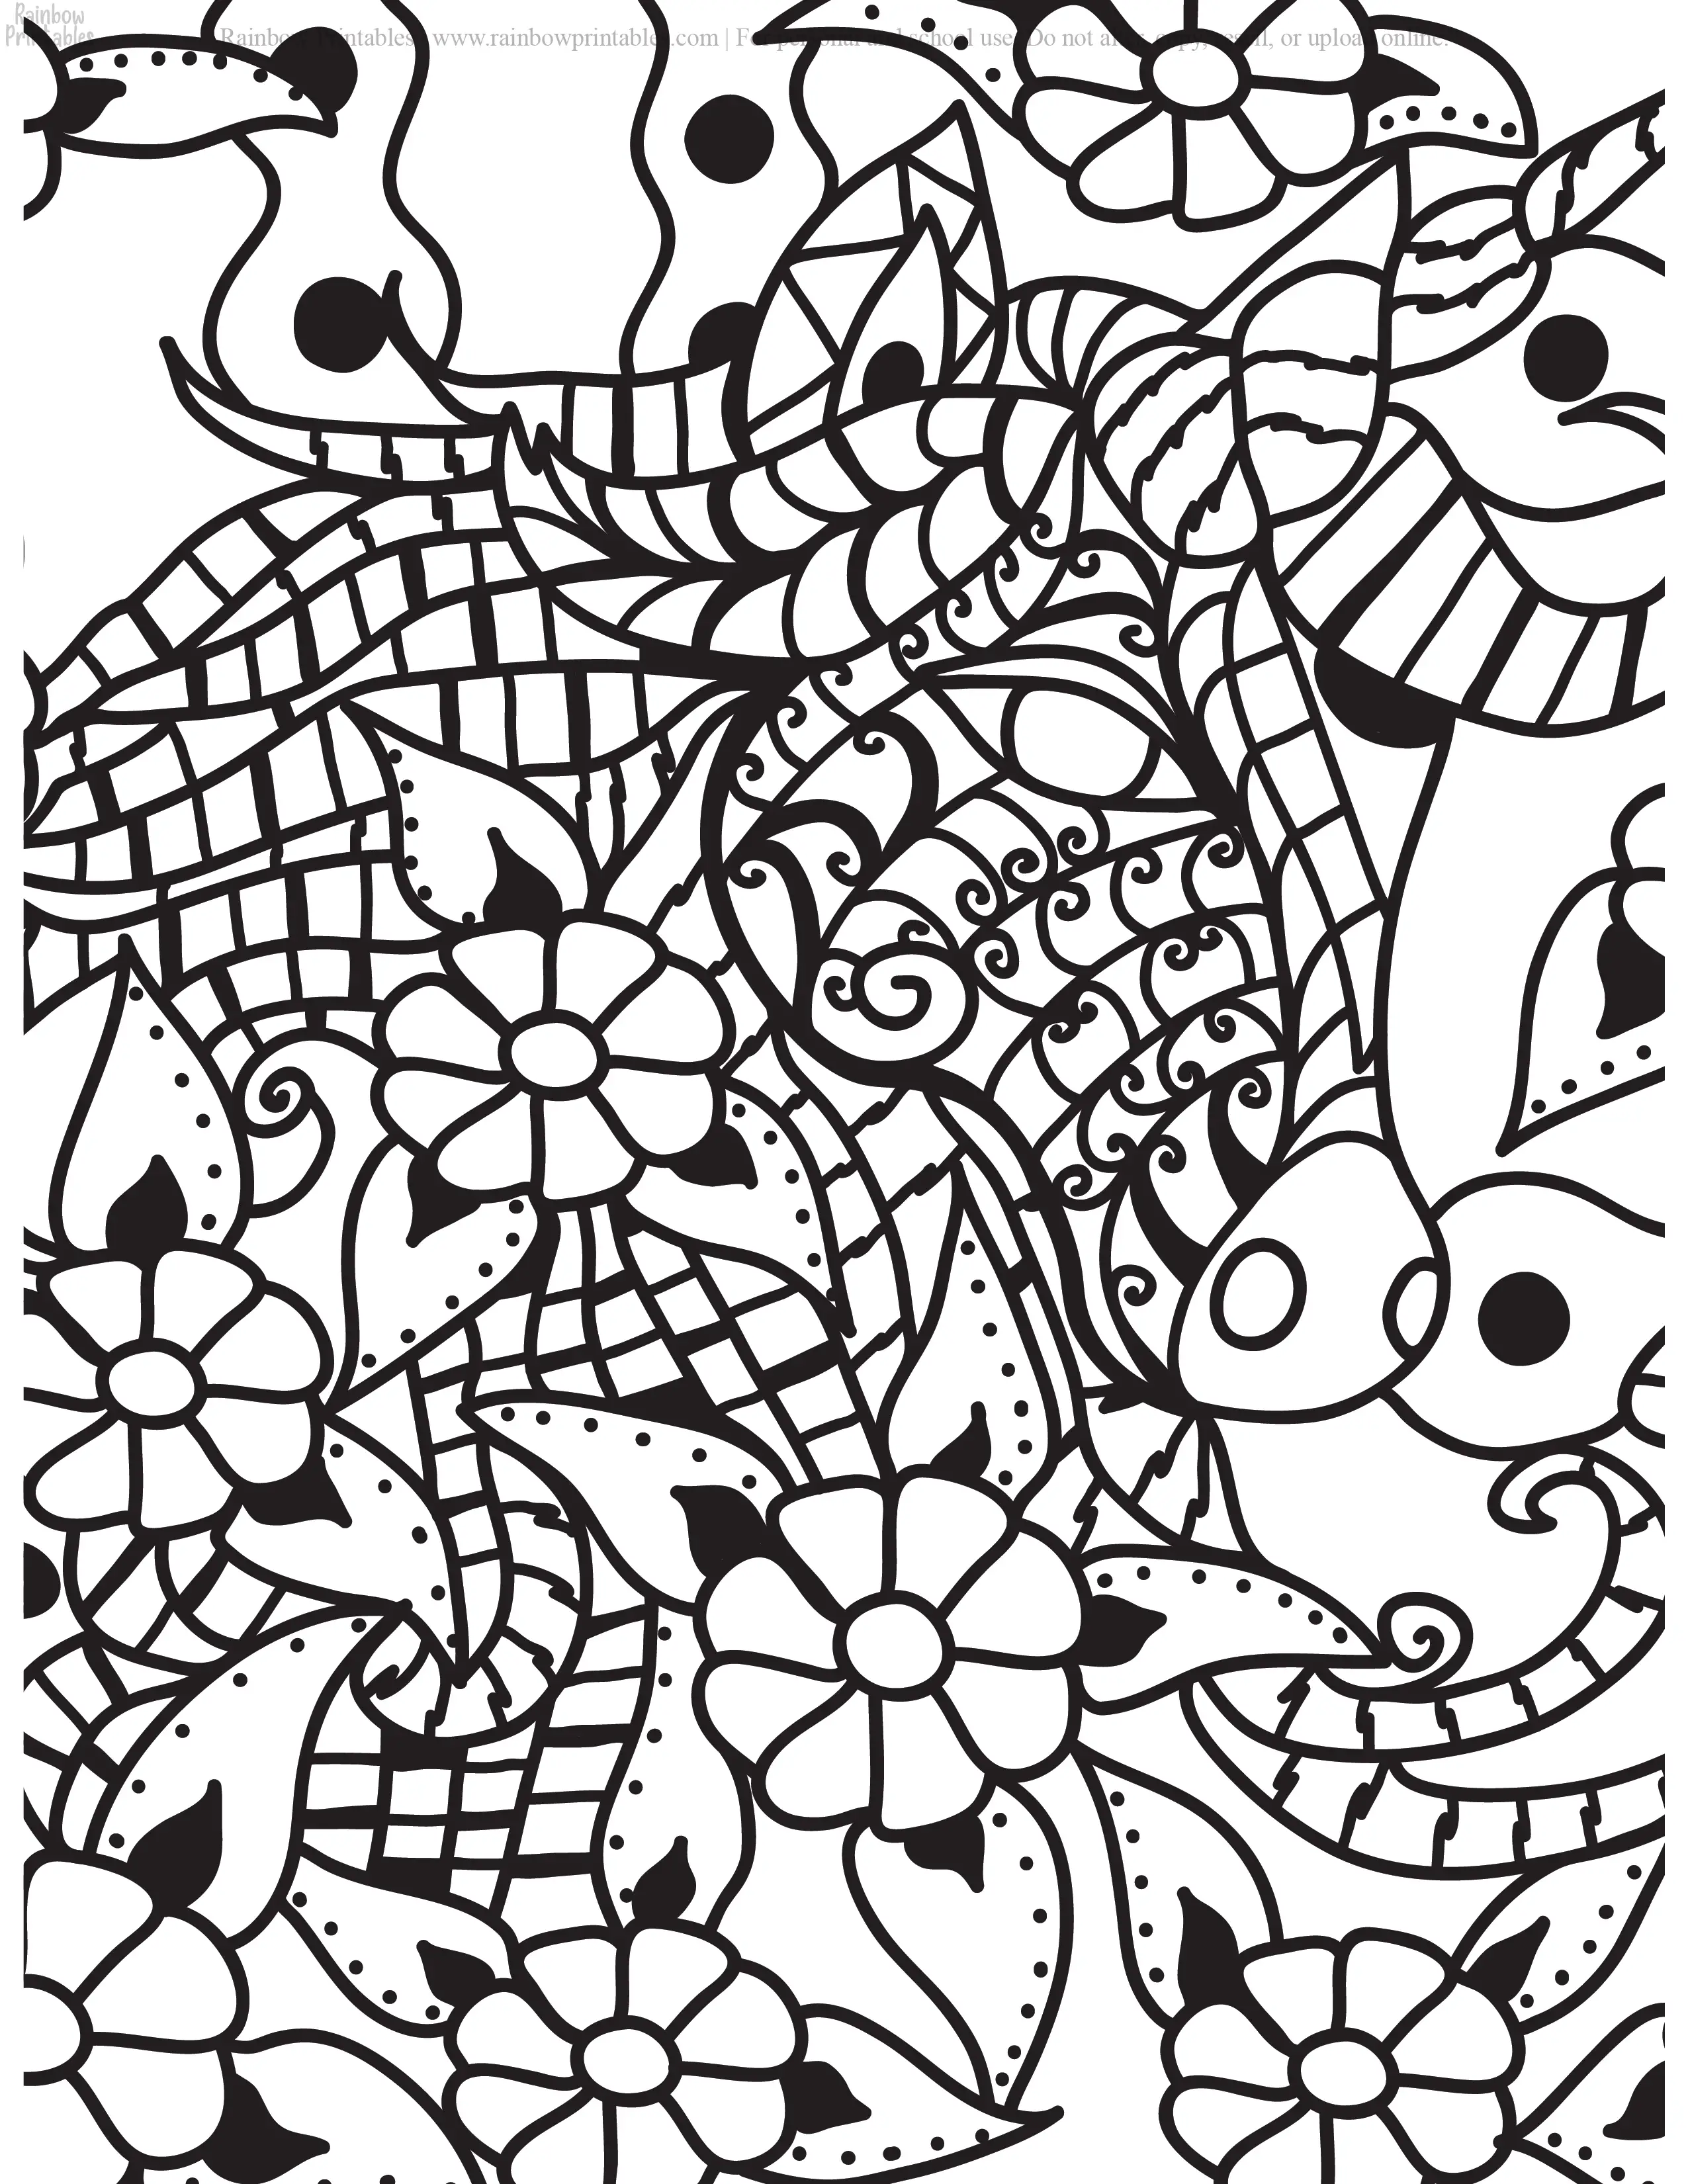 MOASIC MANDALA SEA HORSE PATTERN FANTASY COLORING PAGES FOR KIDS ADULTS GROWN UP PRINTABLE ACTIVITY